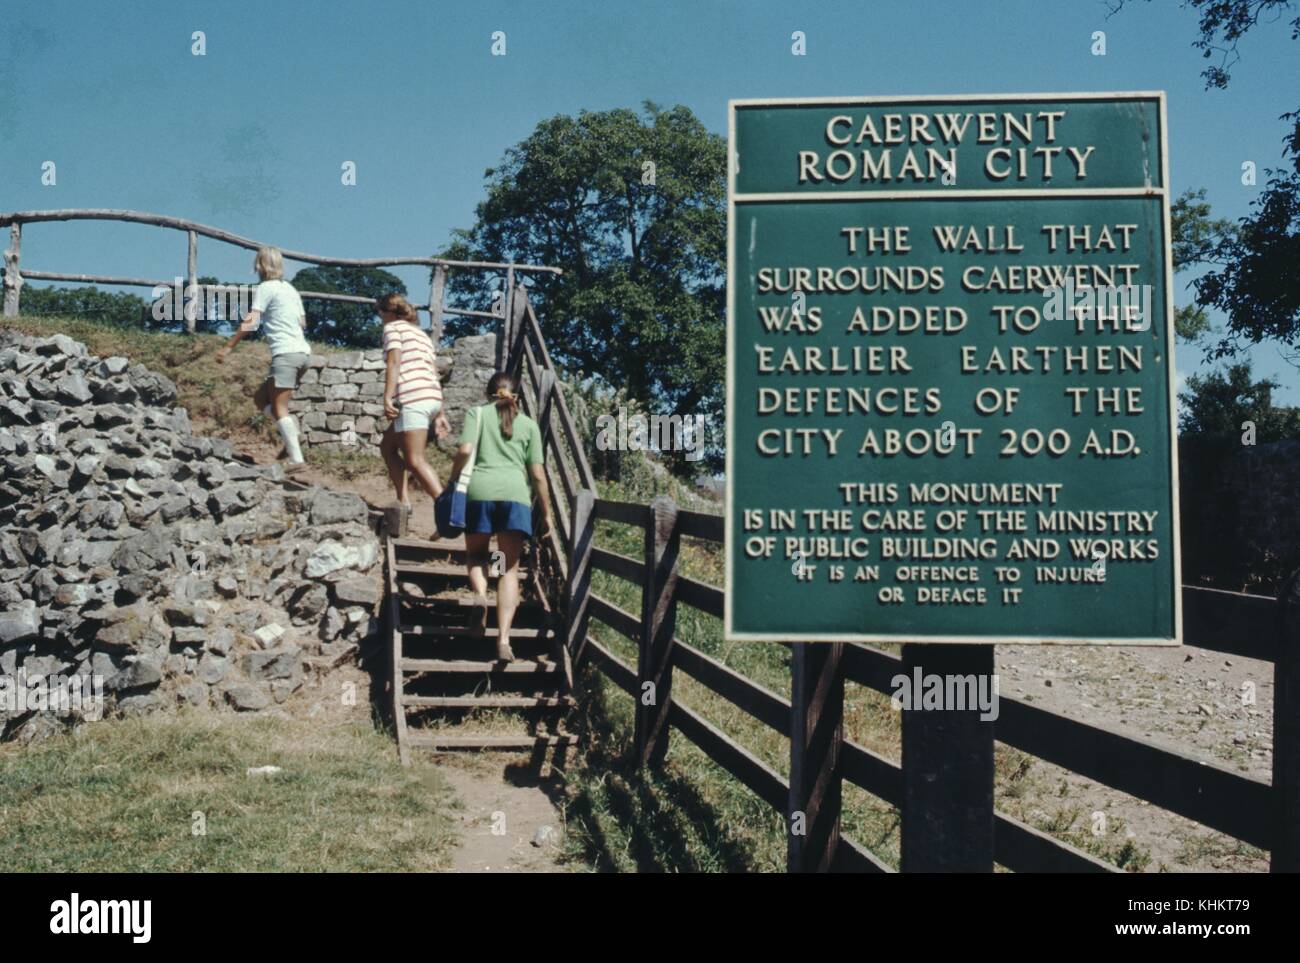 Caerwent Roman City, with sign reading 'The wall that surrounds Caerwent was added to the earlier earthen defence of the city about 200 ad, this monument is in the care of the ministry of public building and works, it an offence to injure or deface it', United Kingdom, 1965. Stock Photo